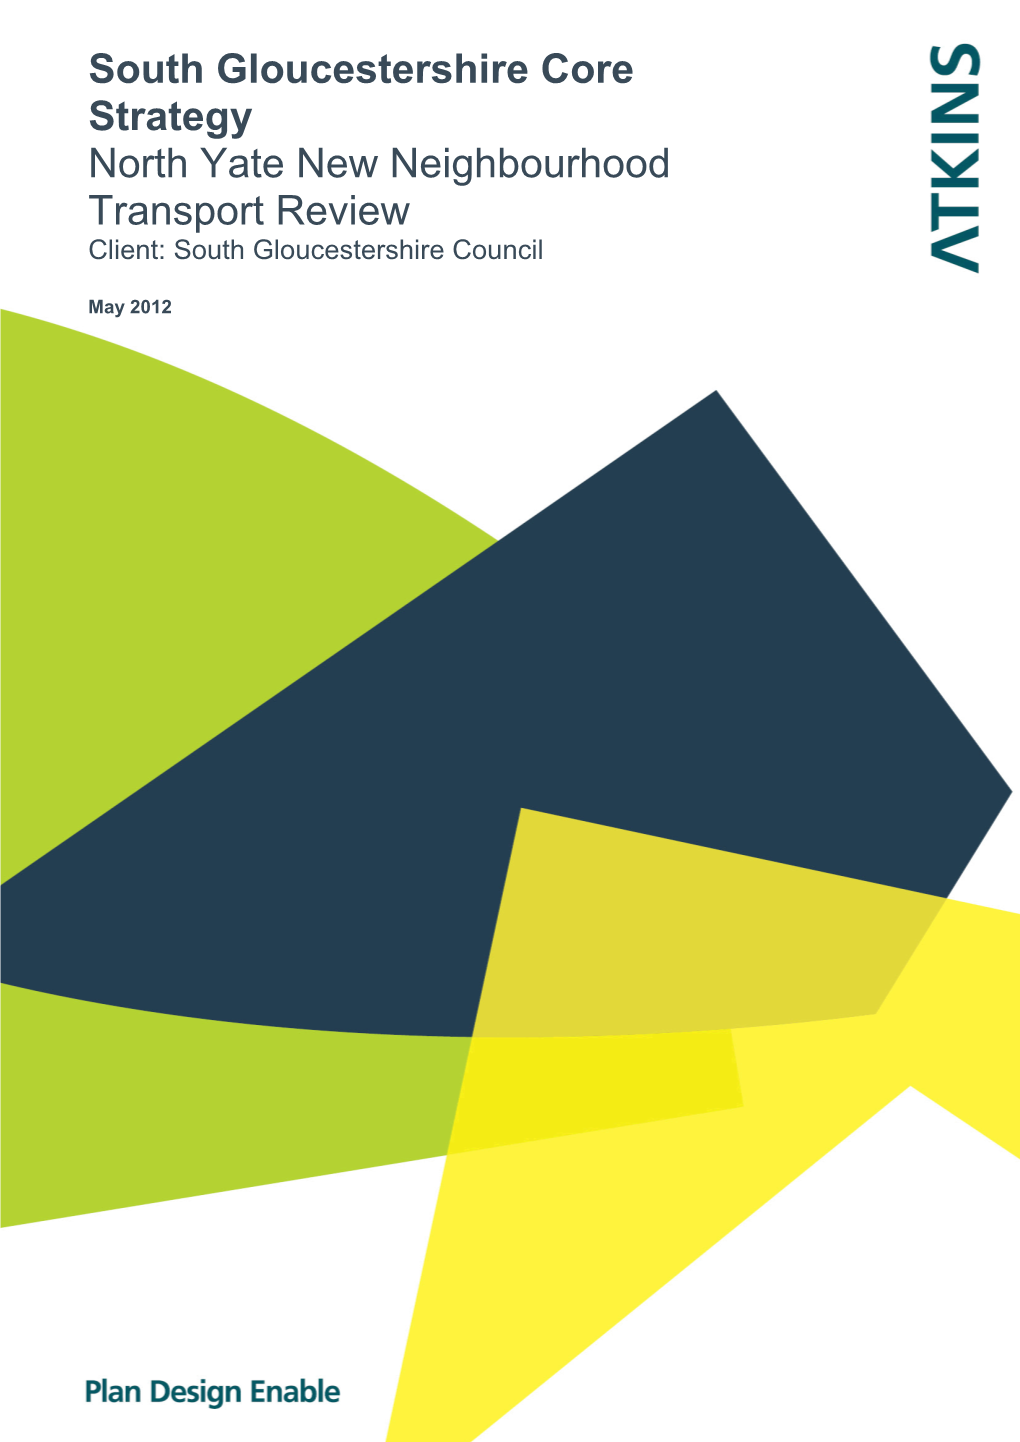 South Gloucestershire Core Strategy North Yate New Neighbourhood Transport Review Client: South Gloucestershire Council